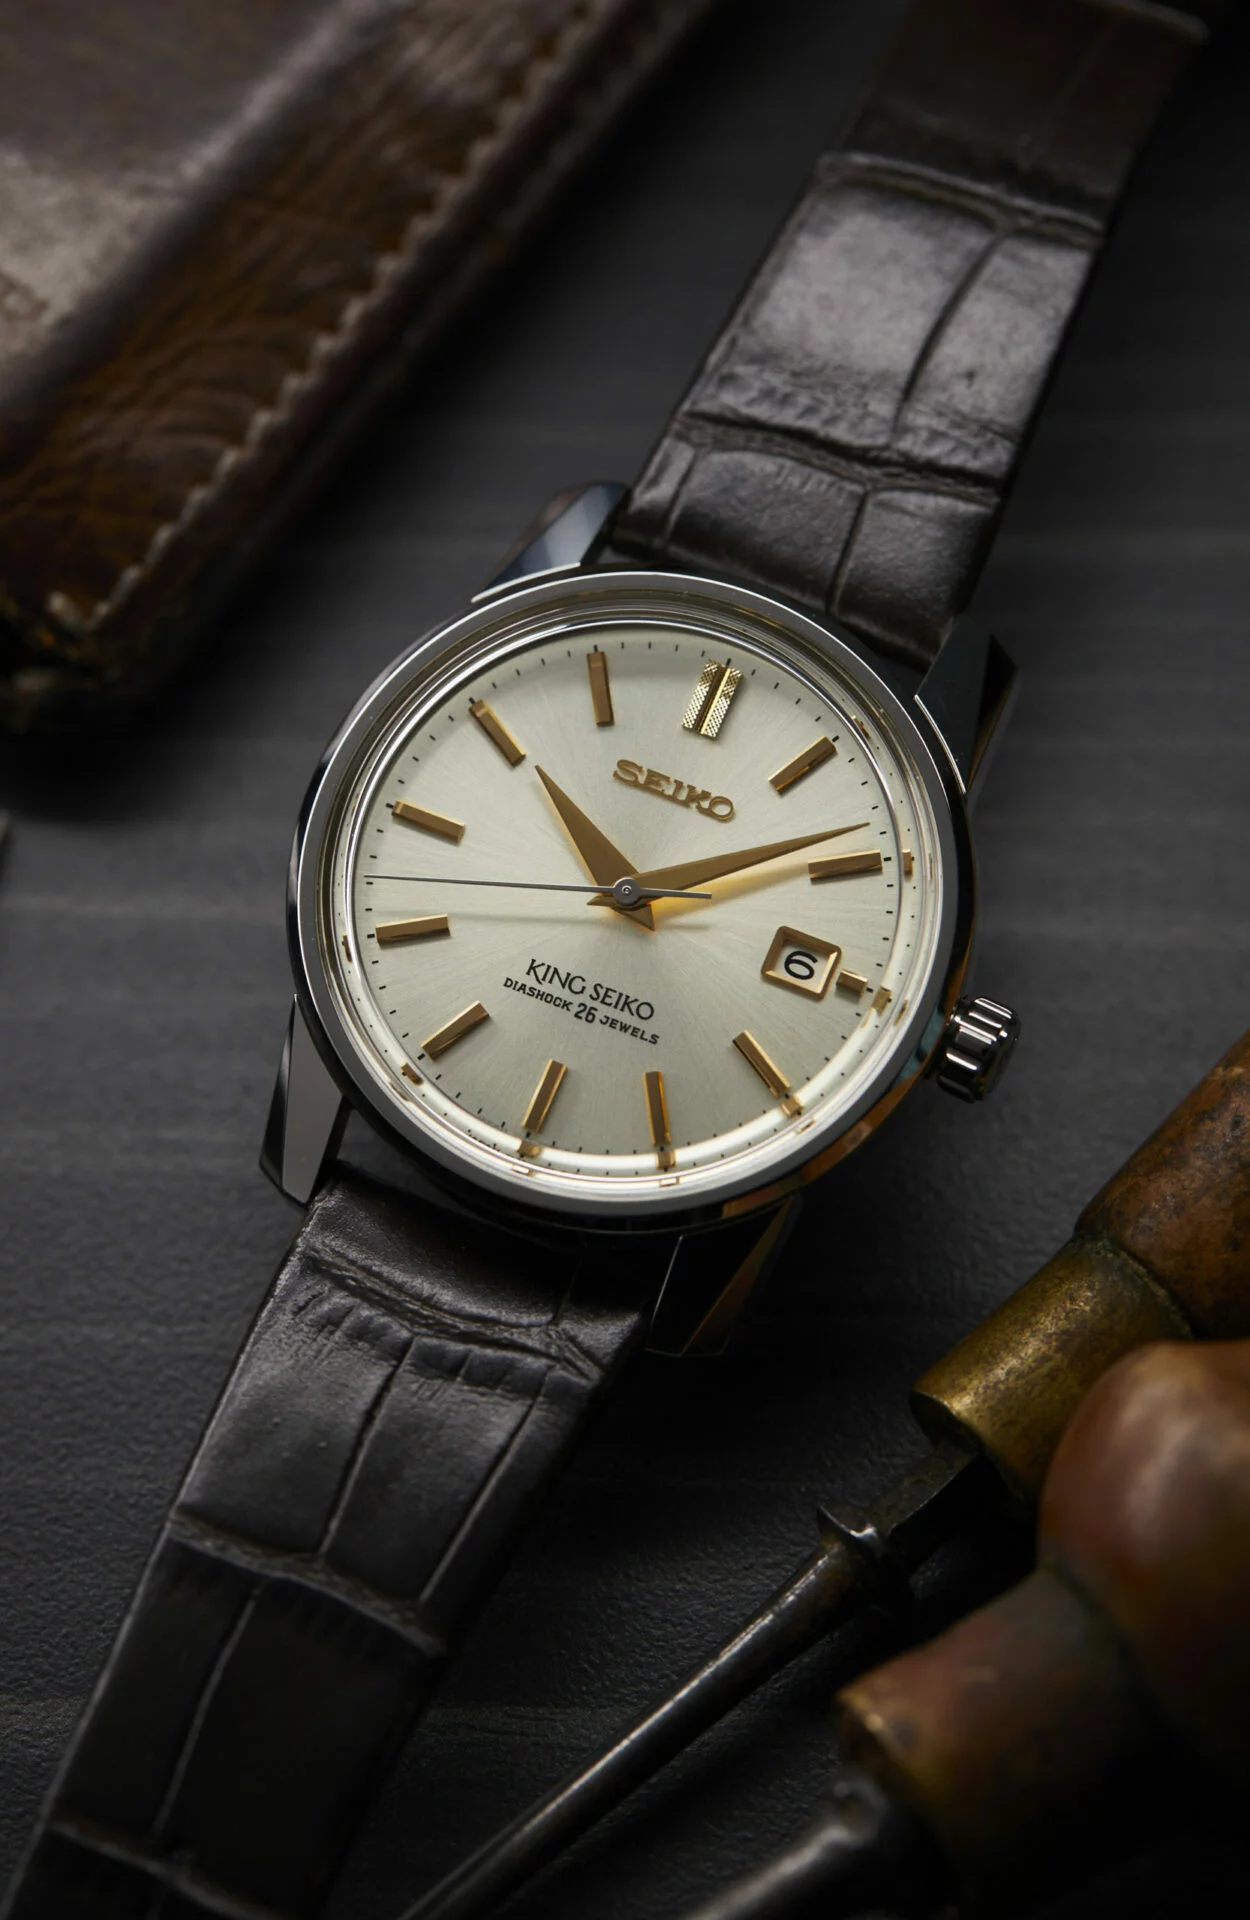 VIDEO: The King Seiko SJE087 gets sexed up with a champagne dial